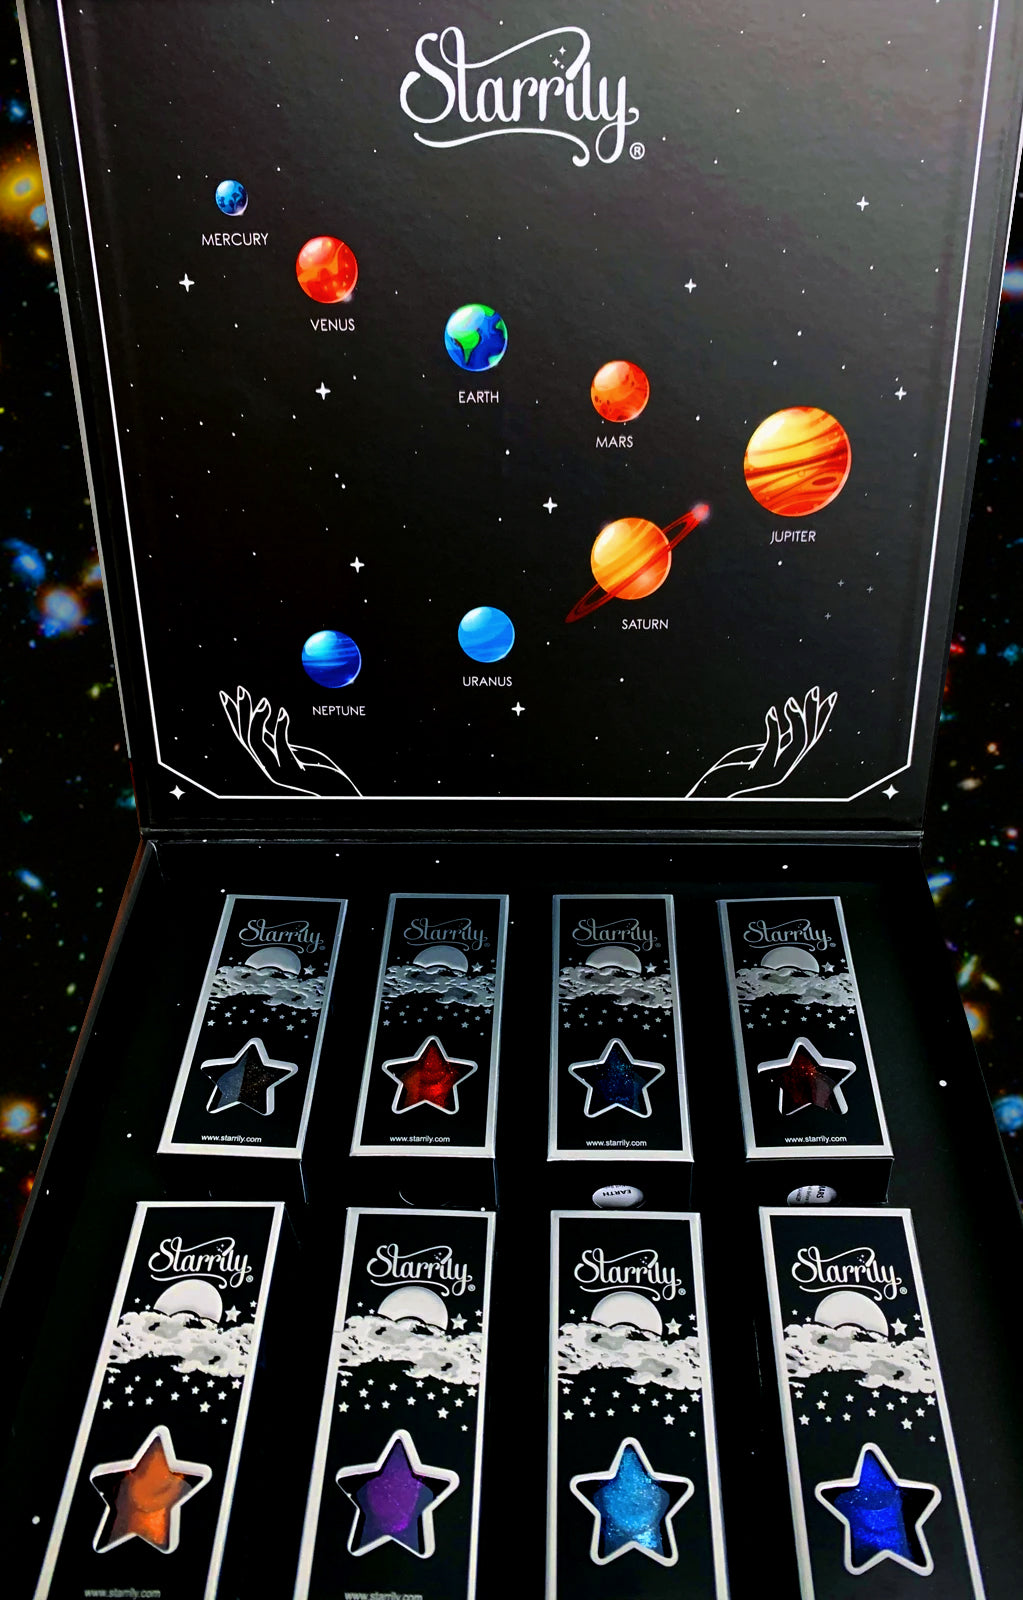 The Planets Collection™ Gift Set - Galaxy Edition